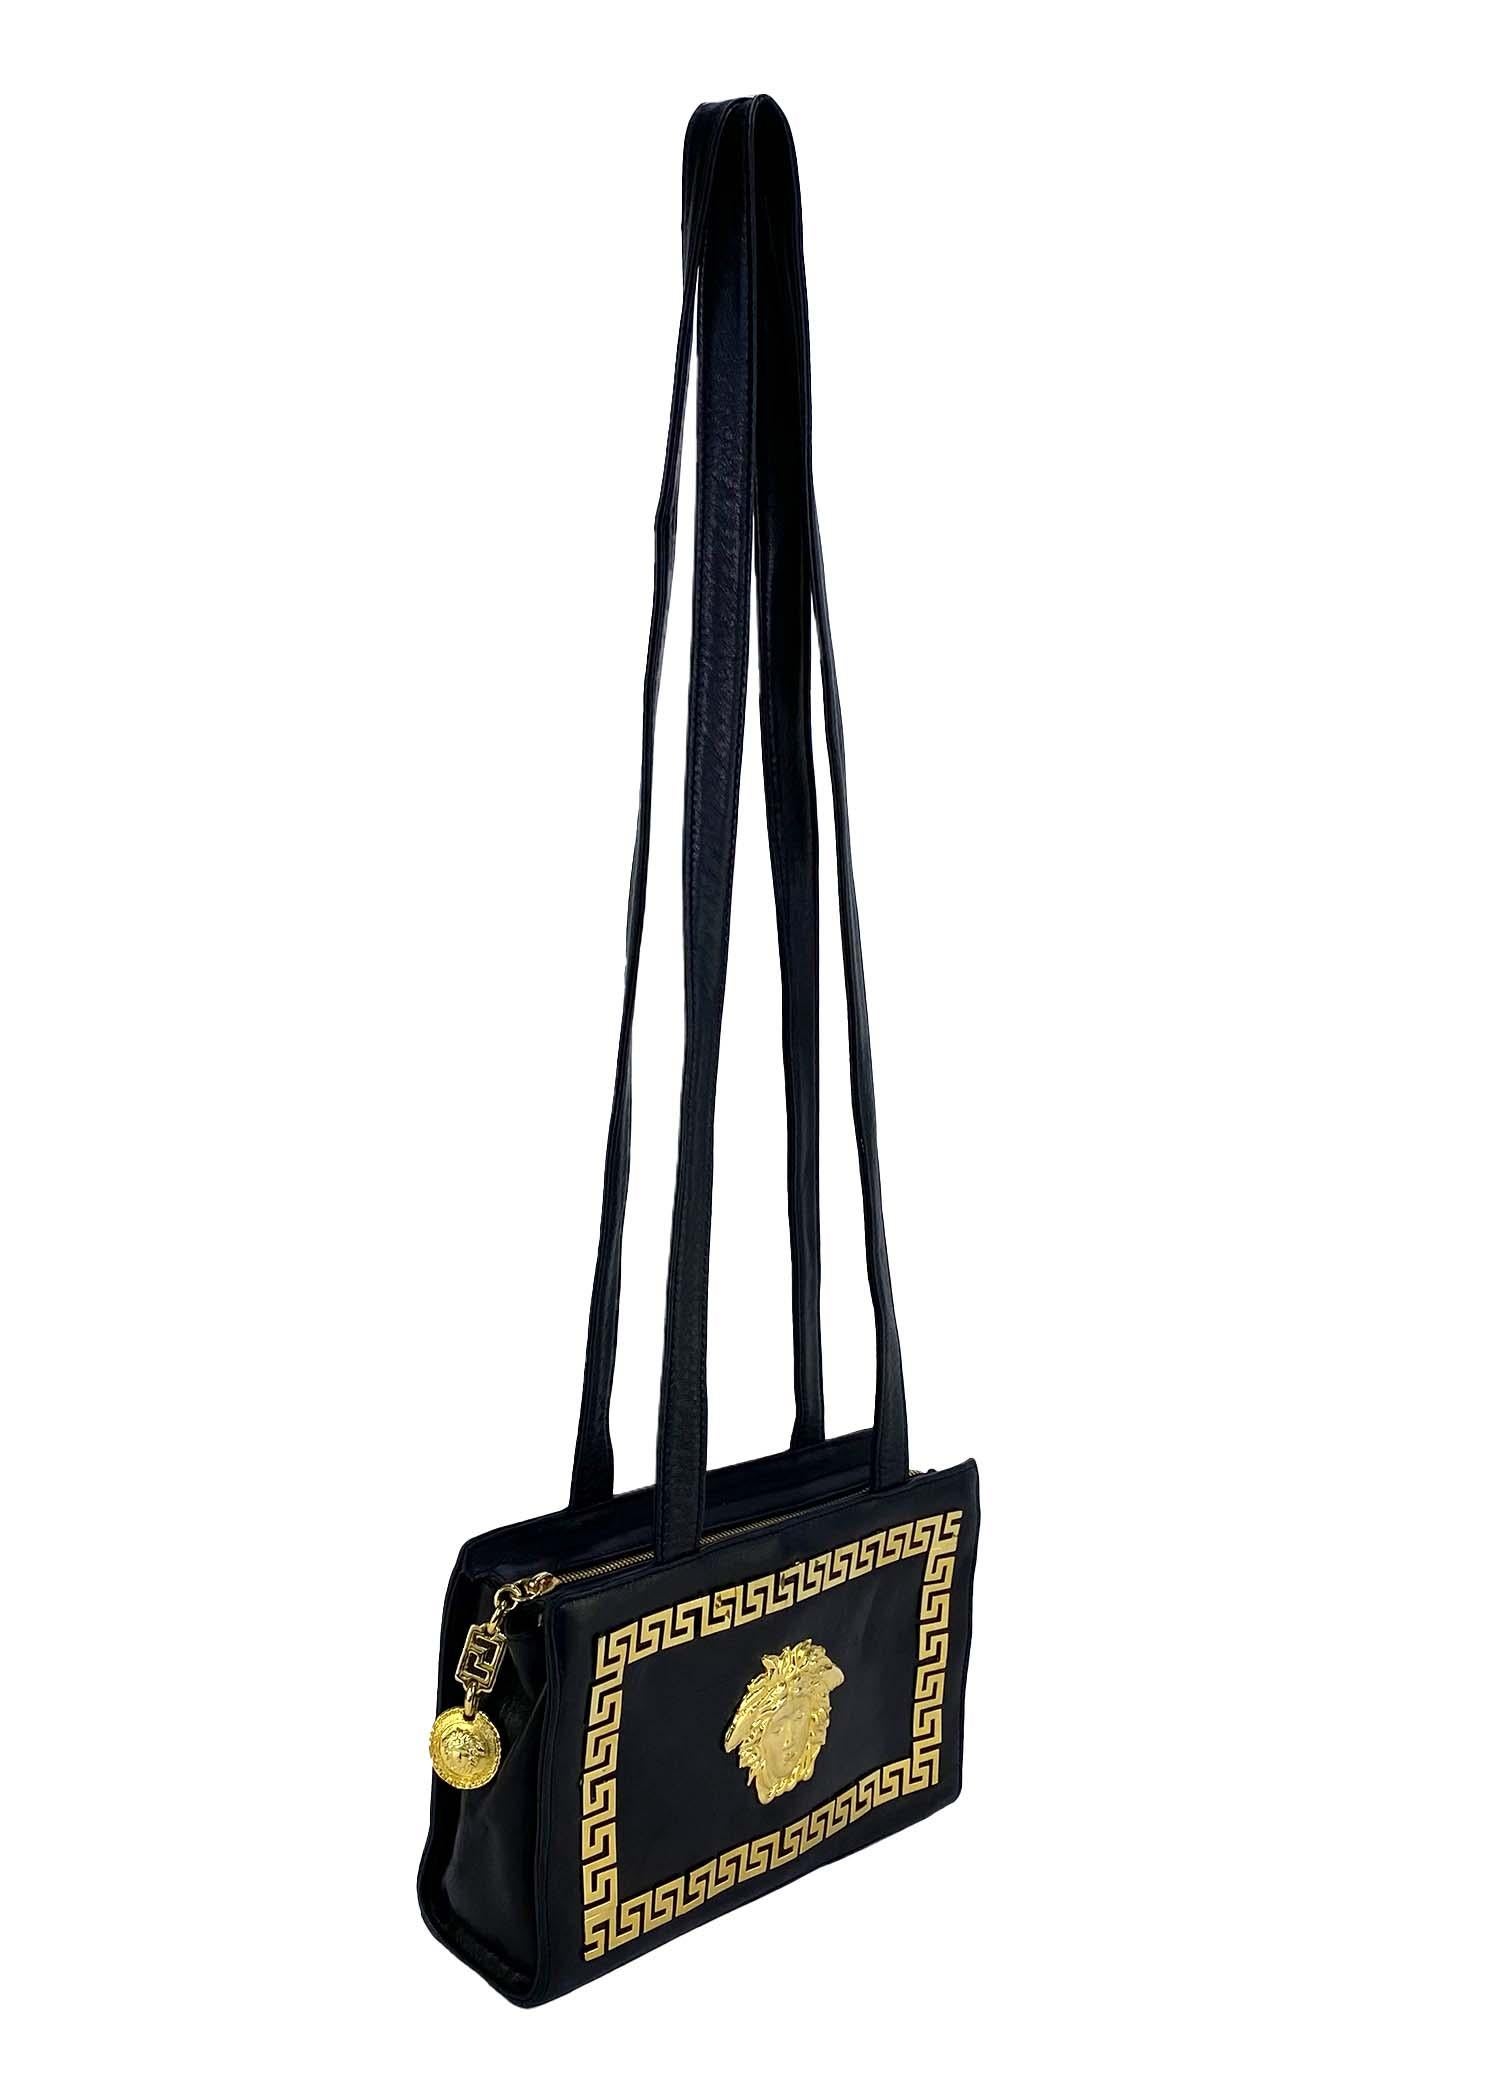 Presenting a classically Gianni Versace Couture purse, designed by Gianni Versace. Created in the early/mid 1990s, this bag constructed entirely of black leather proudly features a large gold Medusa logo with a Greek key border. Versatile, this bag